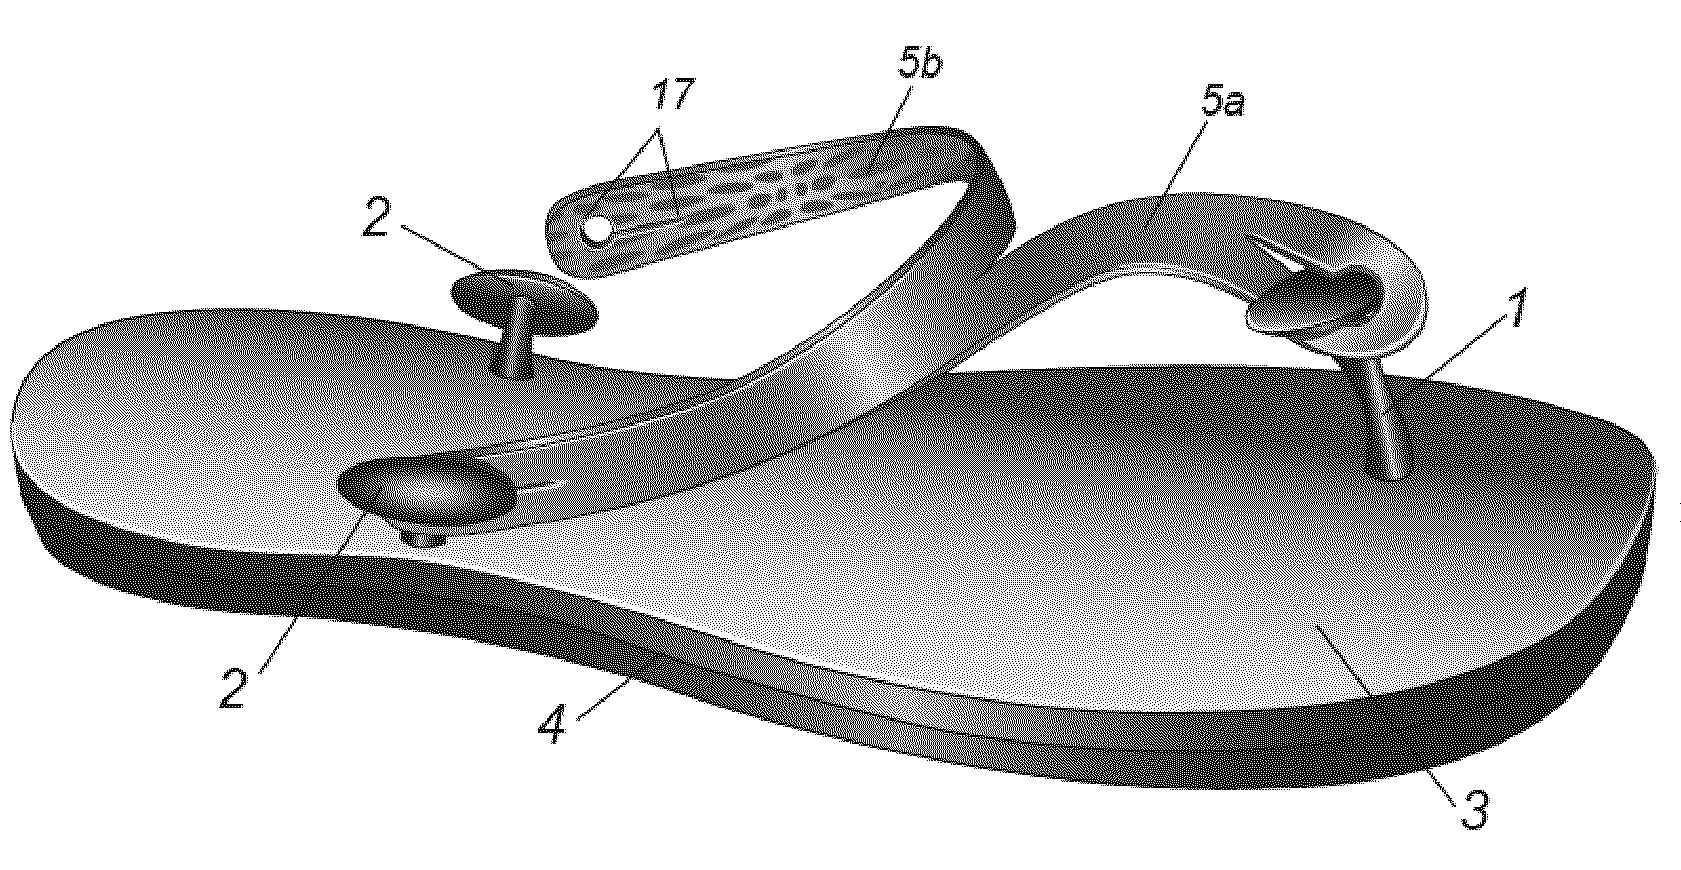 Shoe with removable and reconfigurable uppers